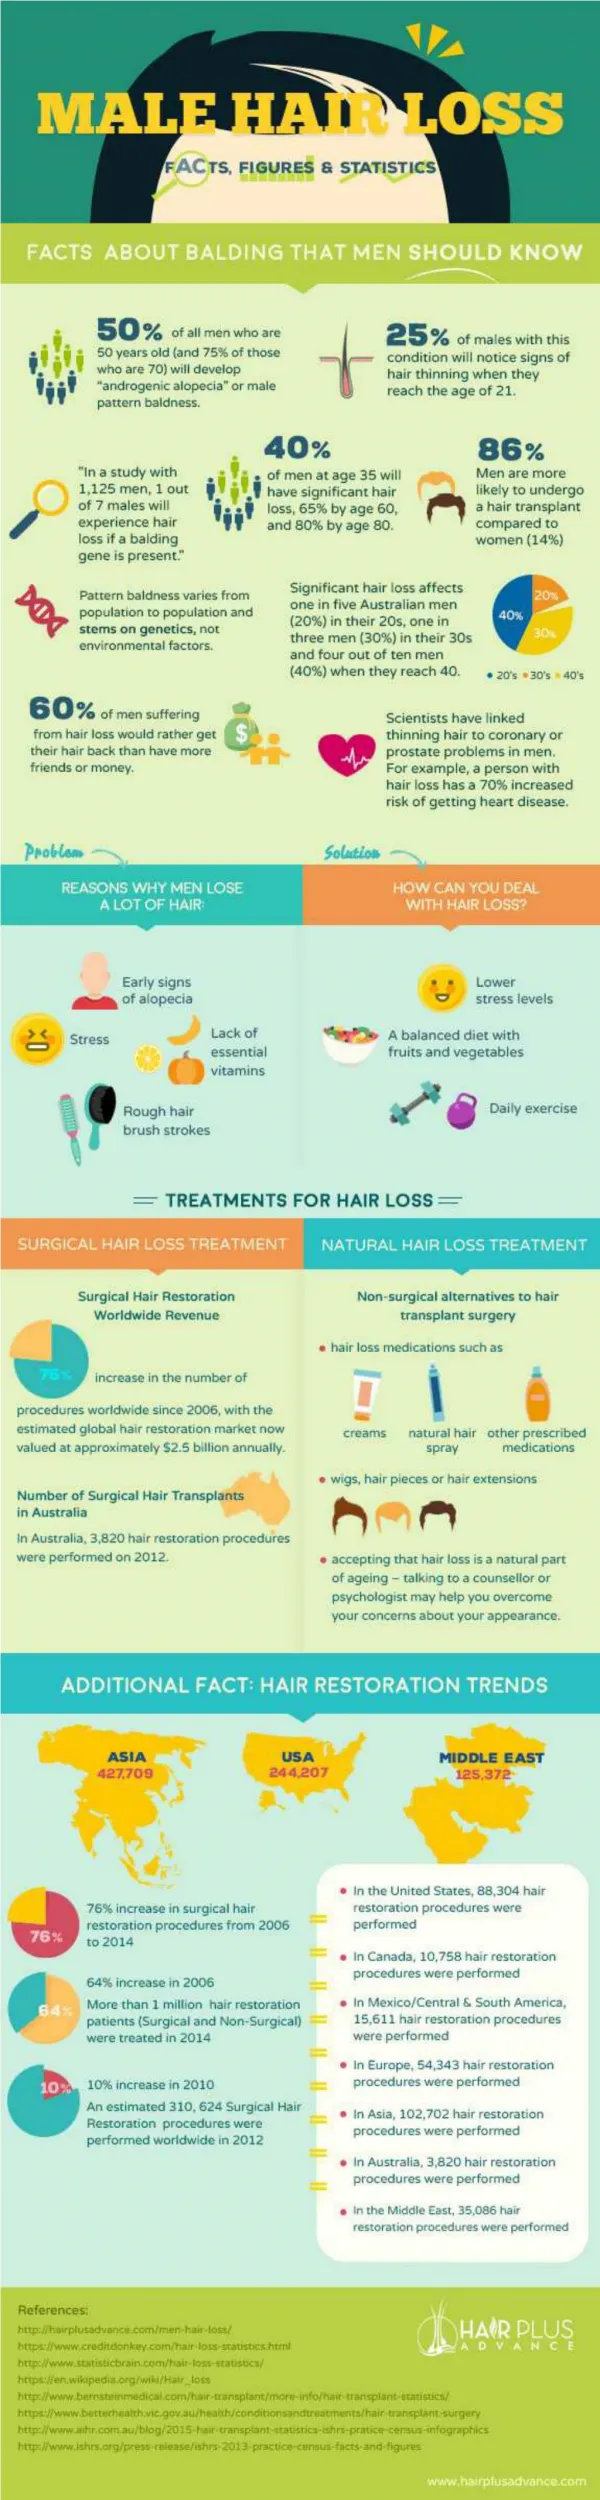 [Infographic] Male Hair Loss: Statistics and Facts